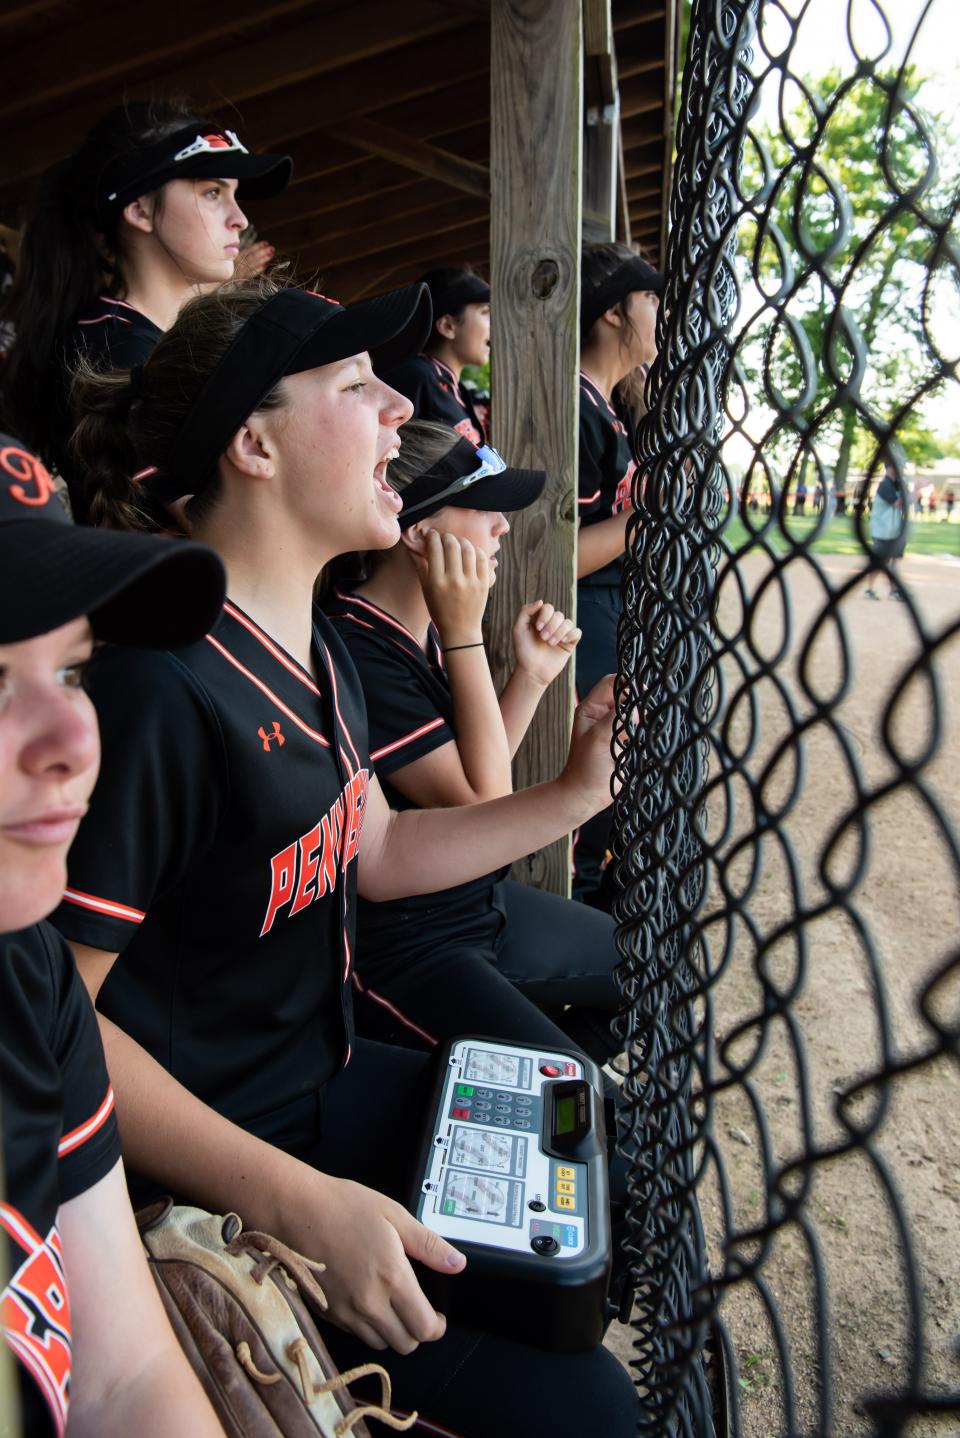 Pennsbury girls cheer on a teammate at bat in a PIAA Class 6A first round playoff game against Manheim at Pennsbury High School in Falls Township on Monday, June 6, 2022. The Falcons defeated the Blue Streaks 10-2 to advance to the quarterfinals.